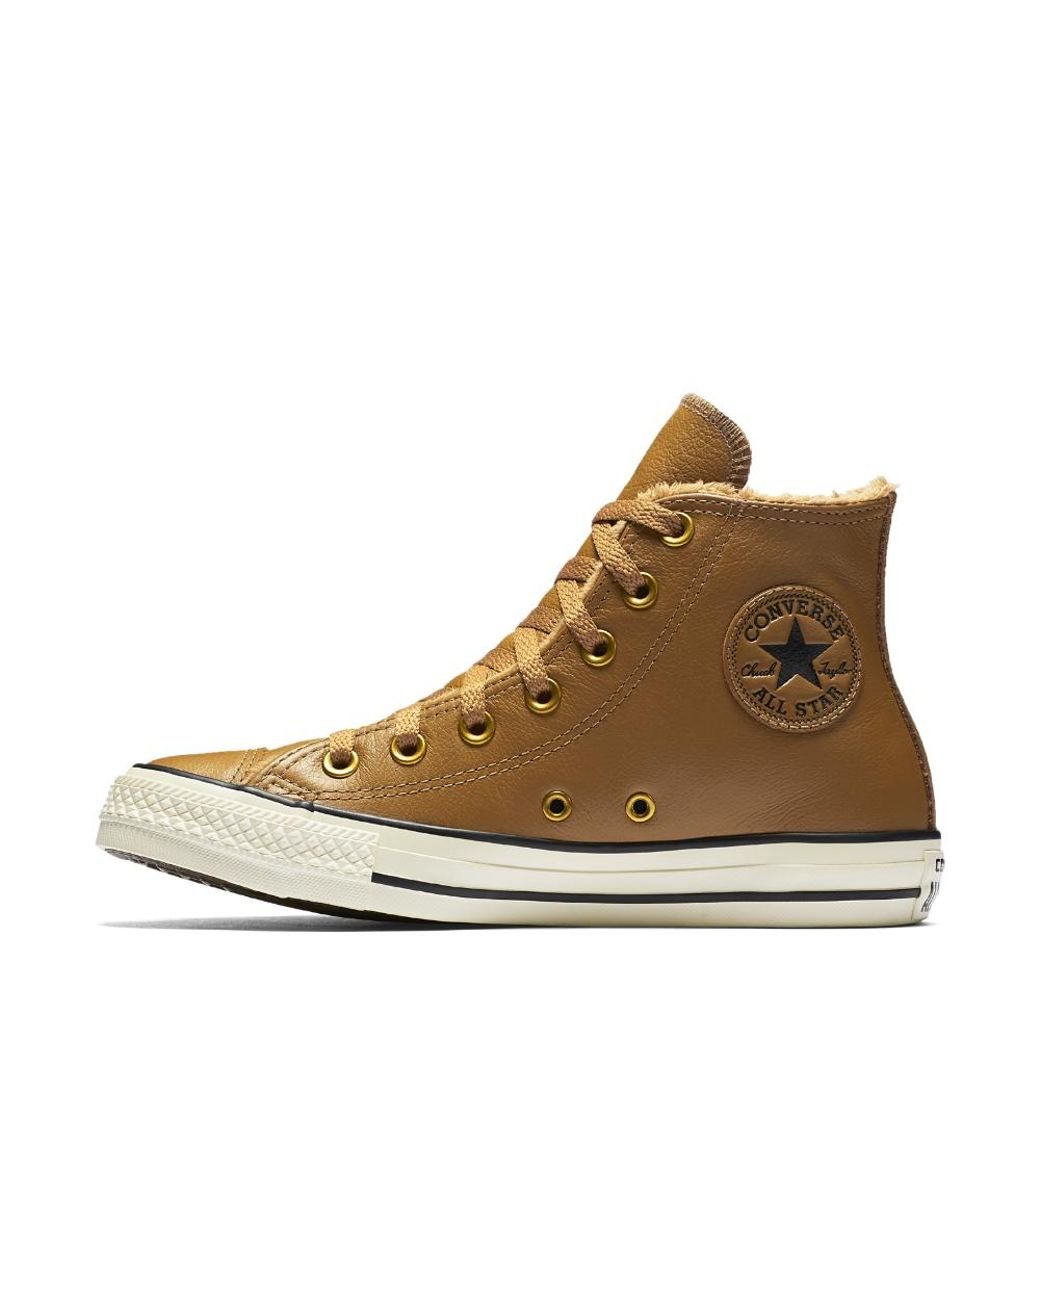 Converse Chuck Taylor All Star Leather And Faux Fur High Top Women's Shoe  in Brown | Lyst